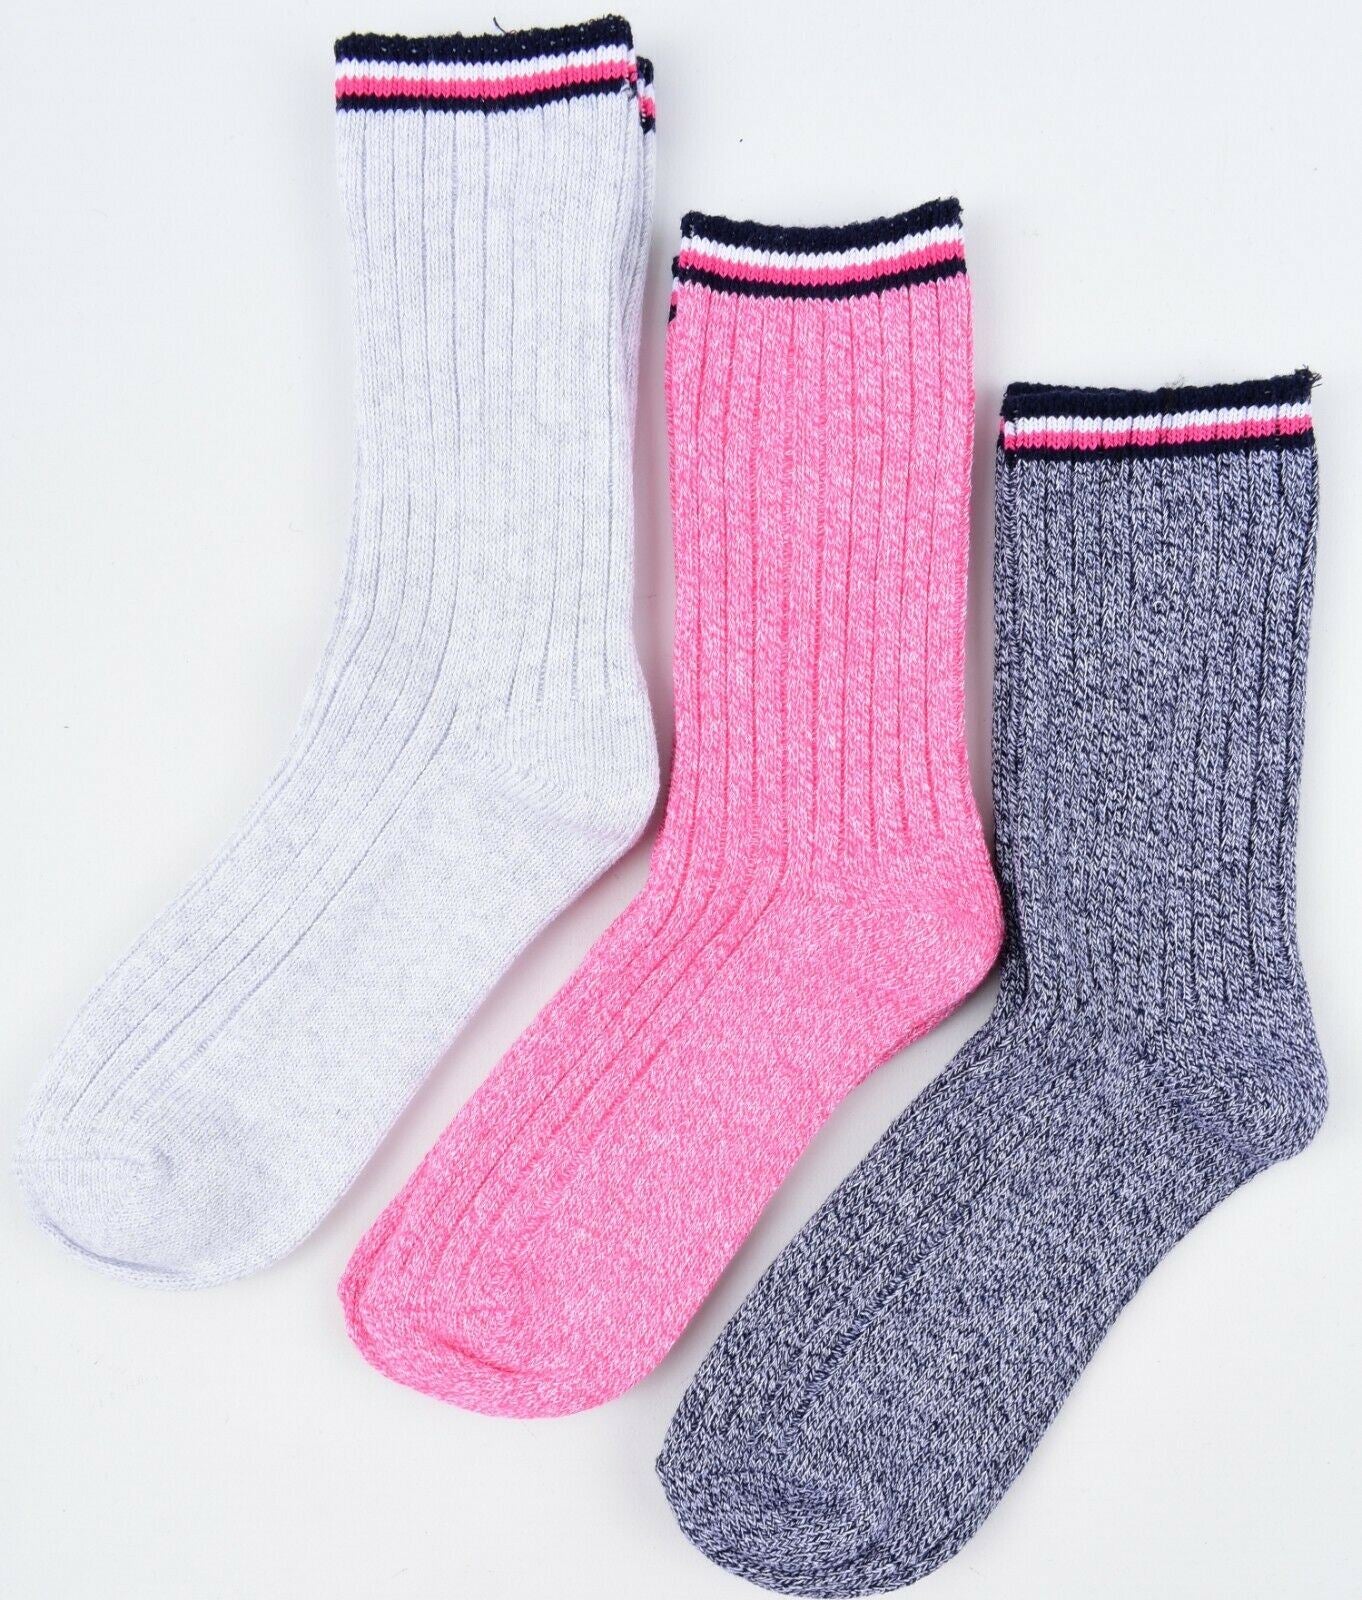 TOMMY HILFIGER 3-pack Girls' Camper Socks, Grey/Pink/Charcoal, size 9-12 years